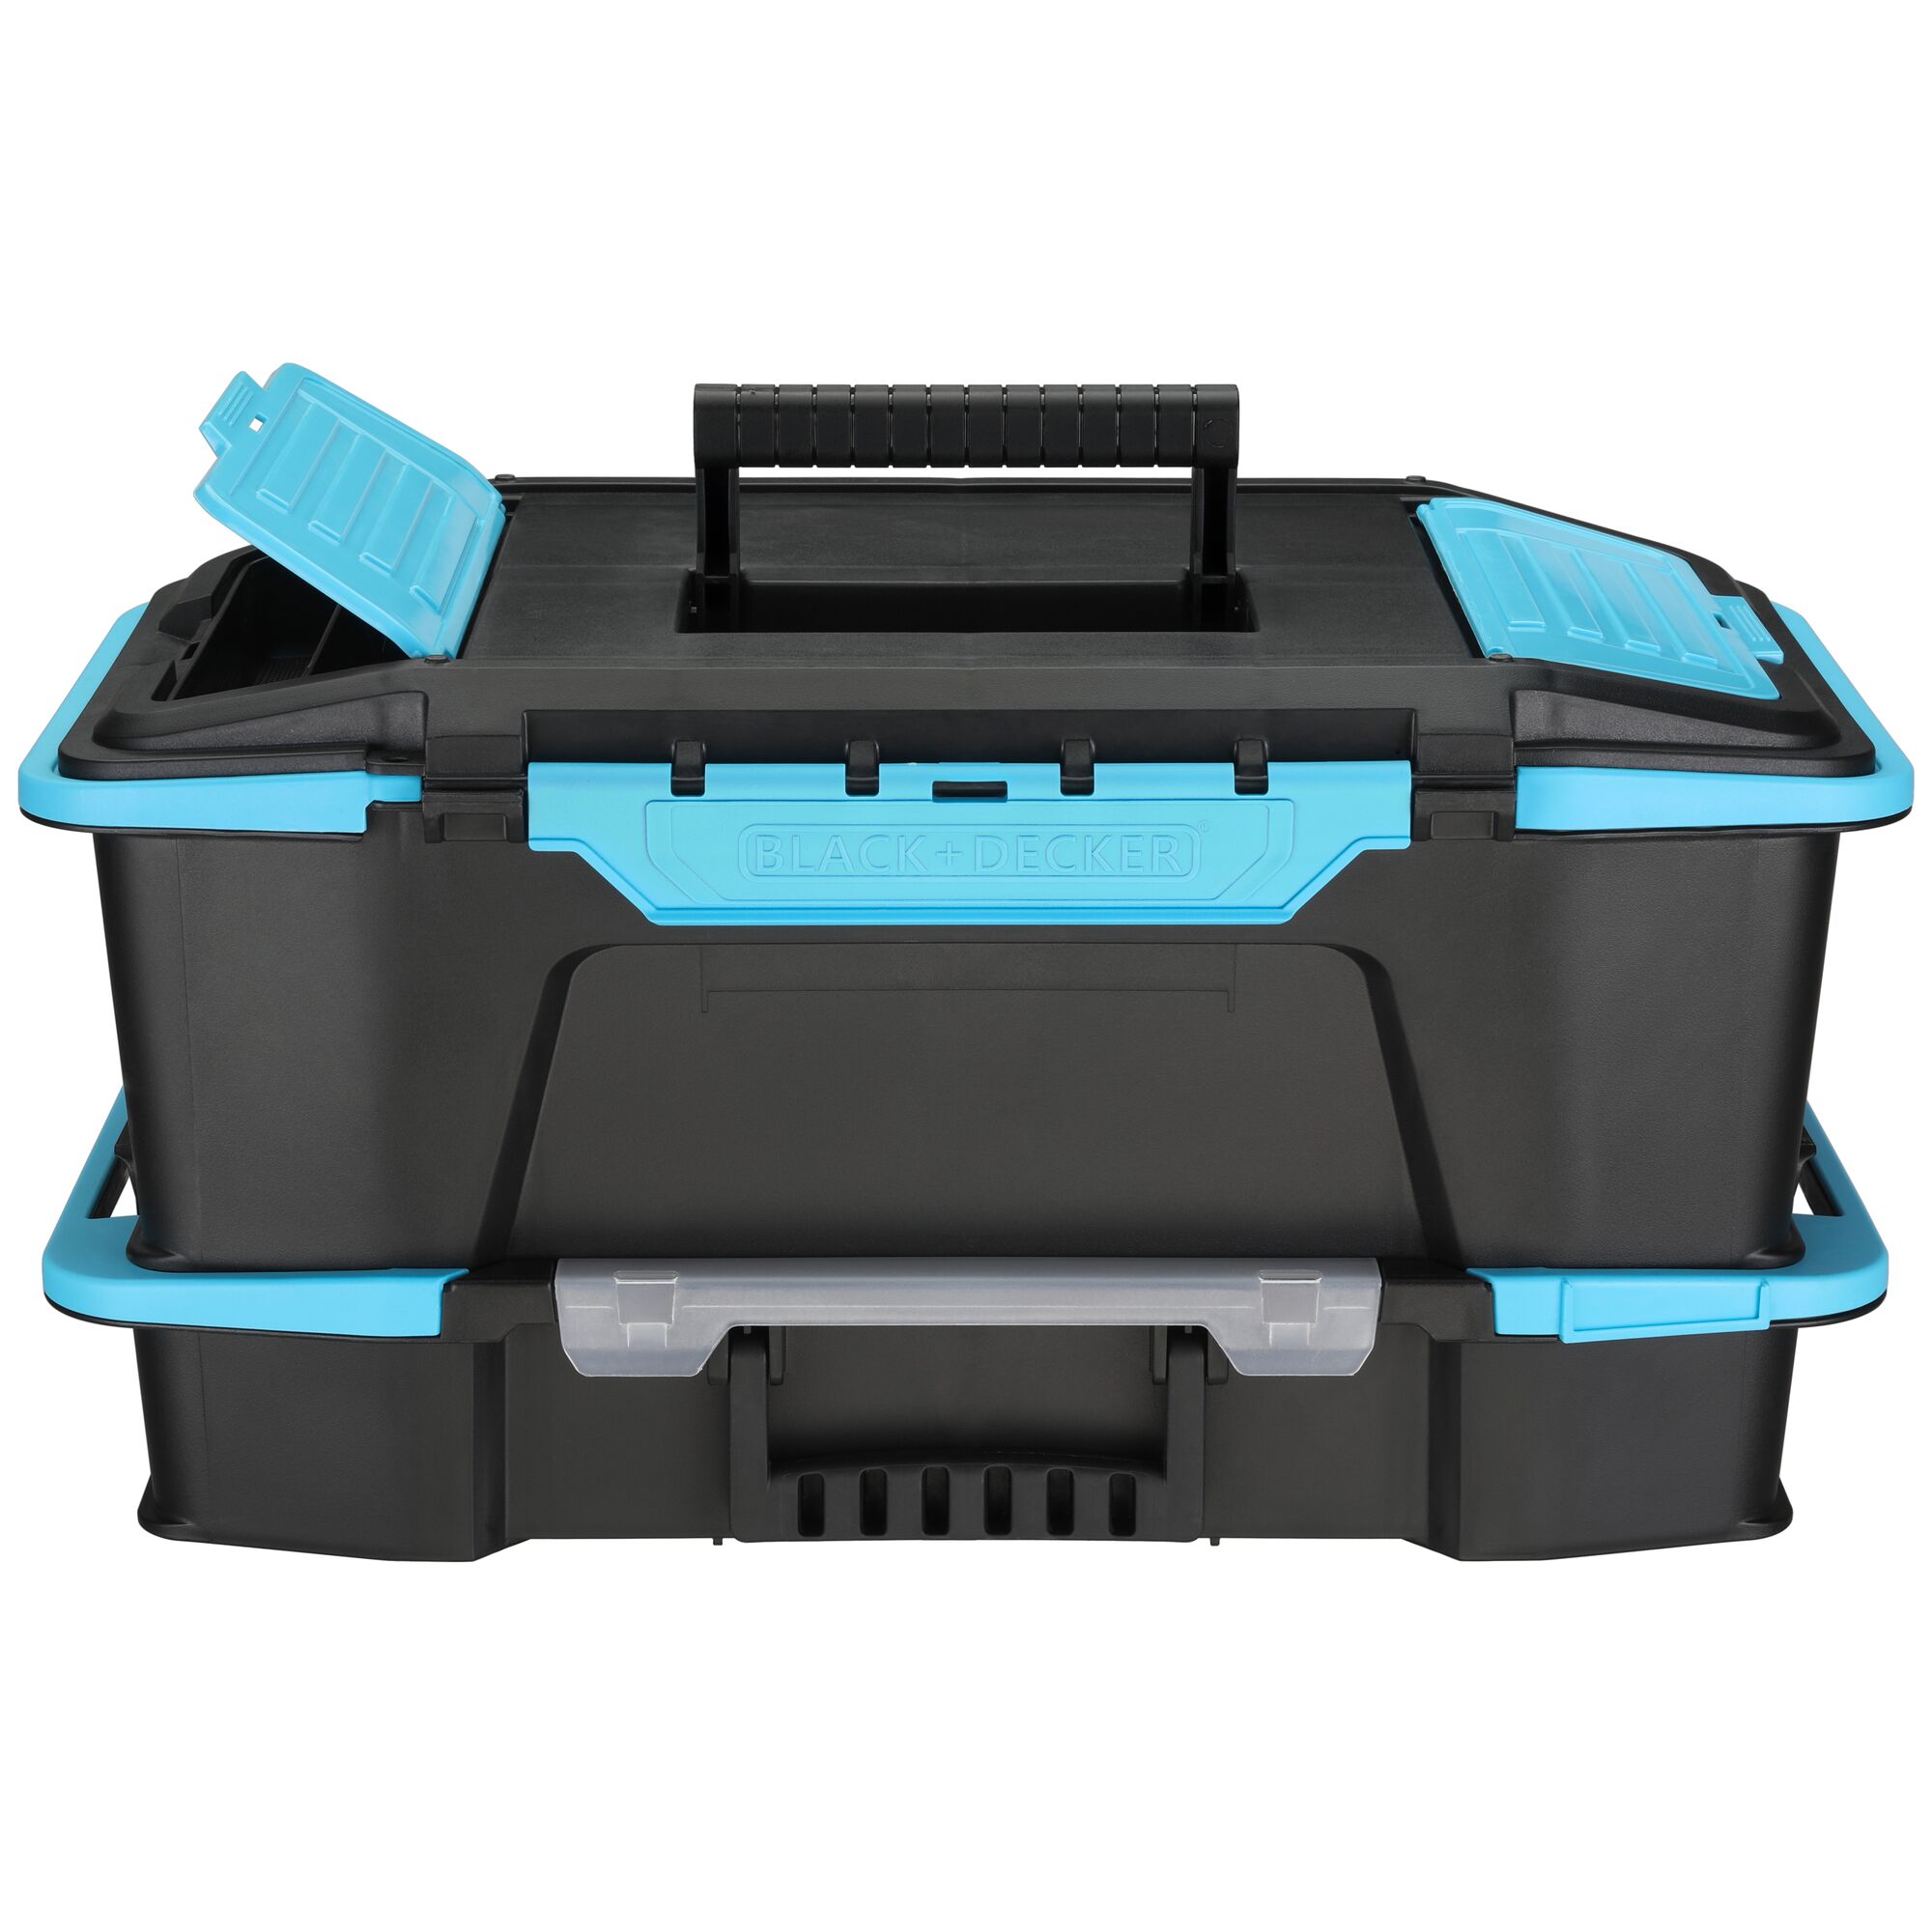 Black and decker 19” Stackable Caddy And Organizer with one top side compartment lid opened